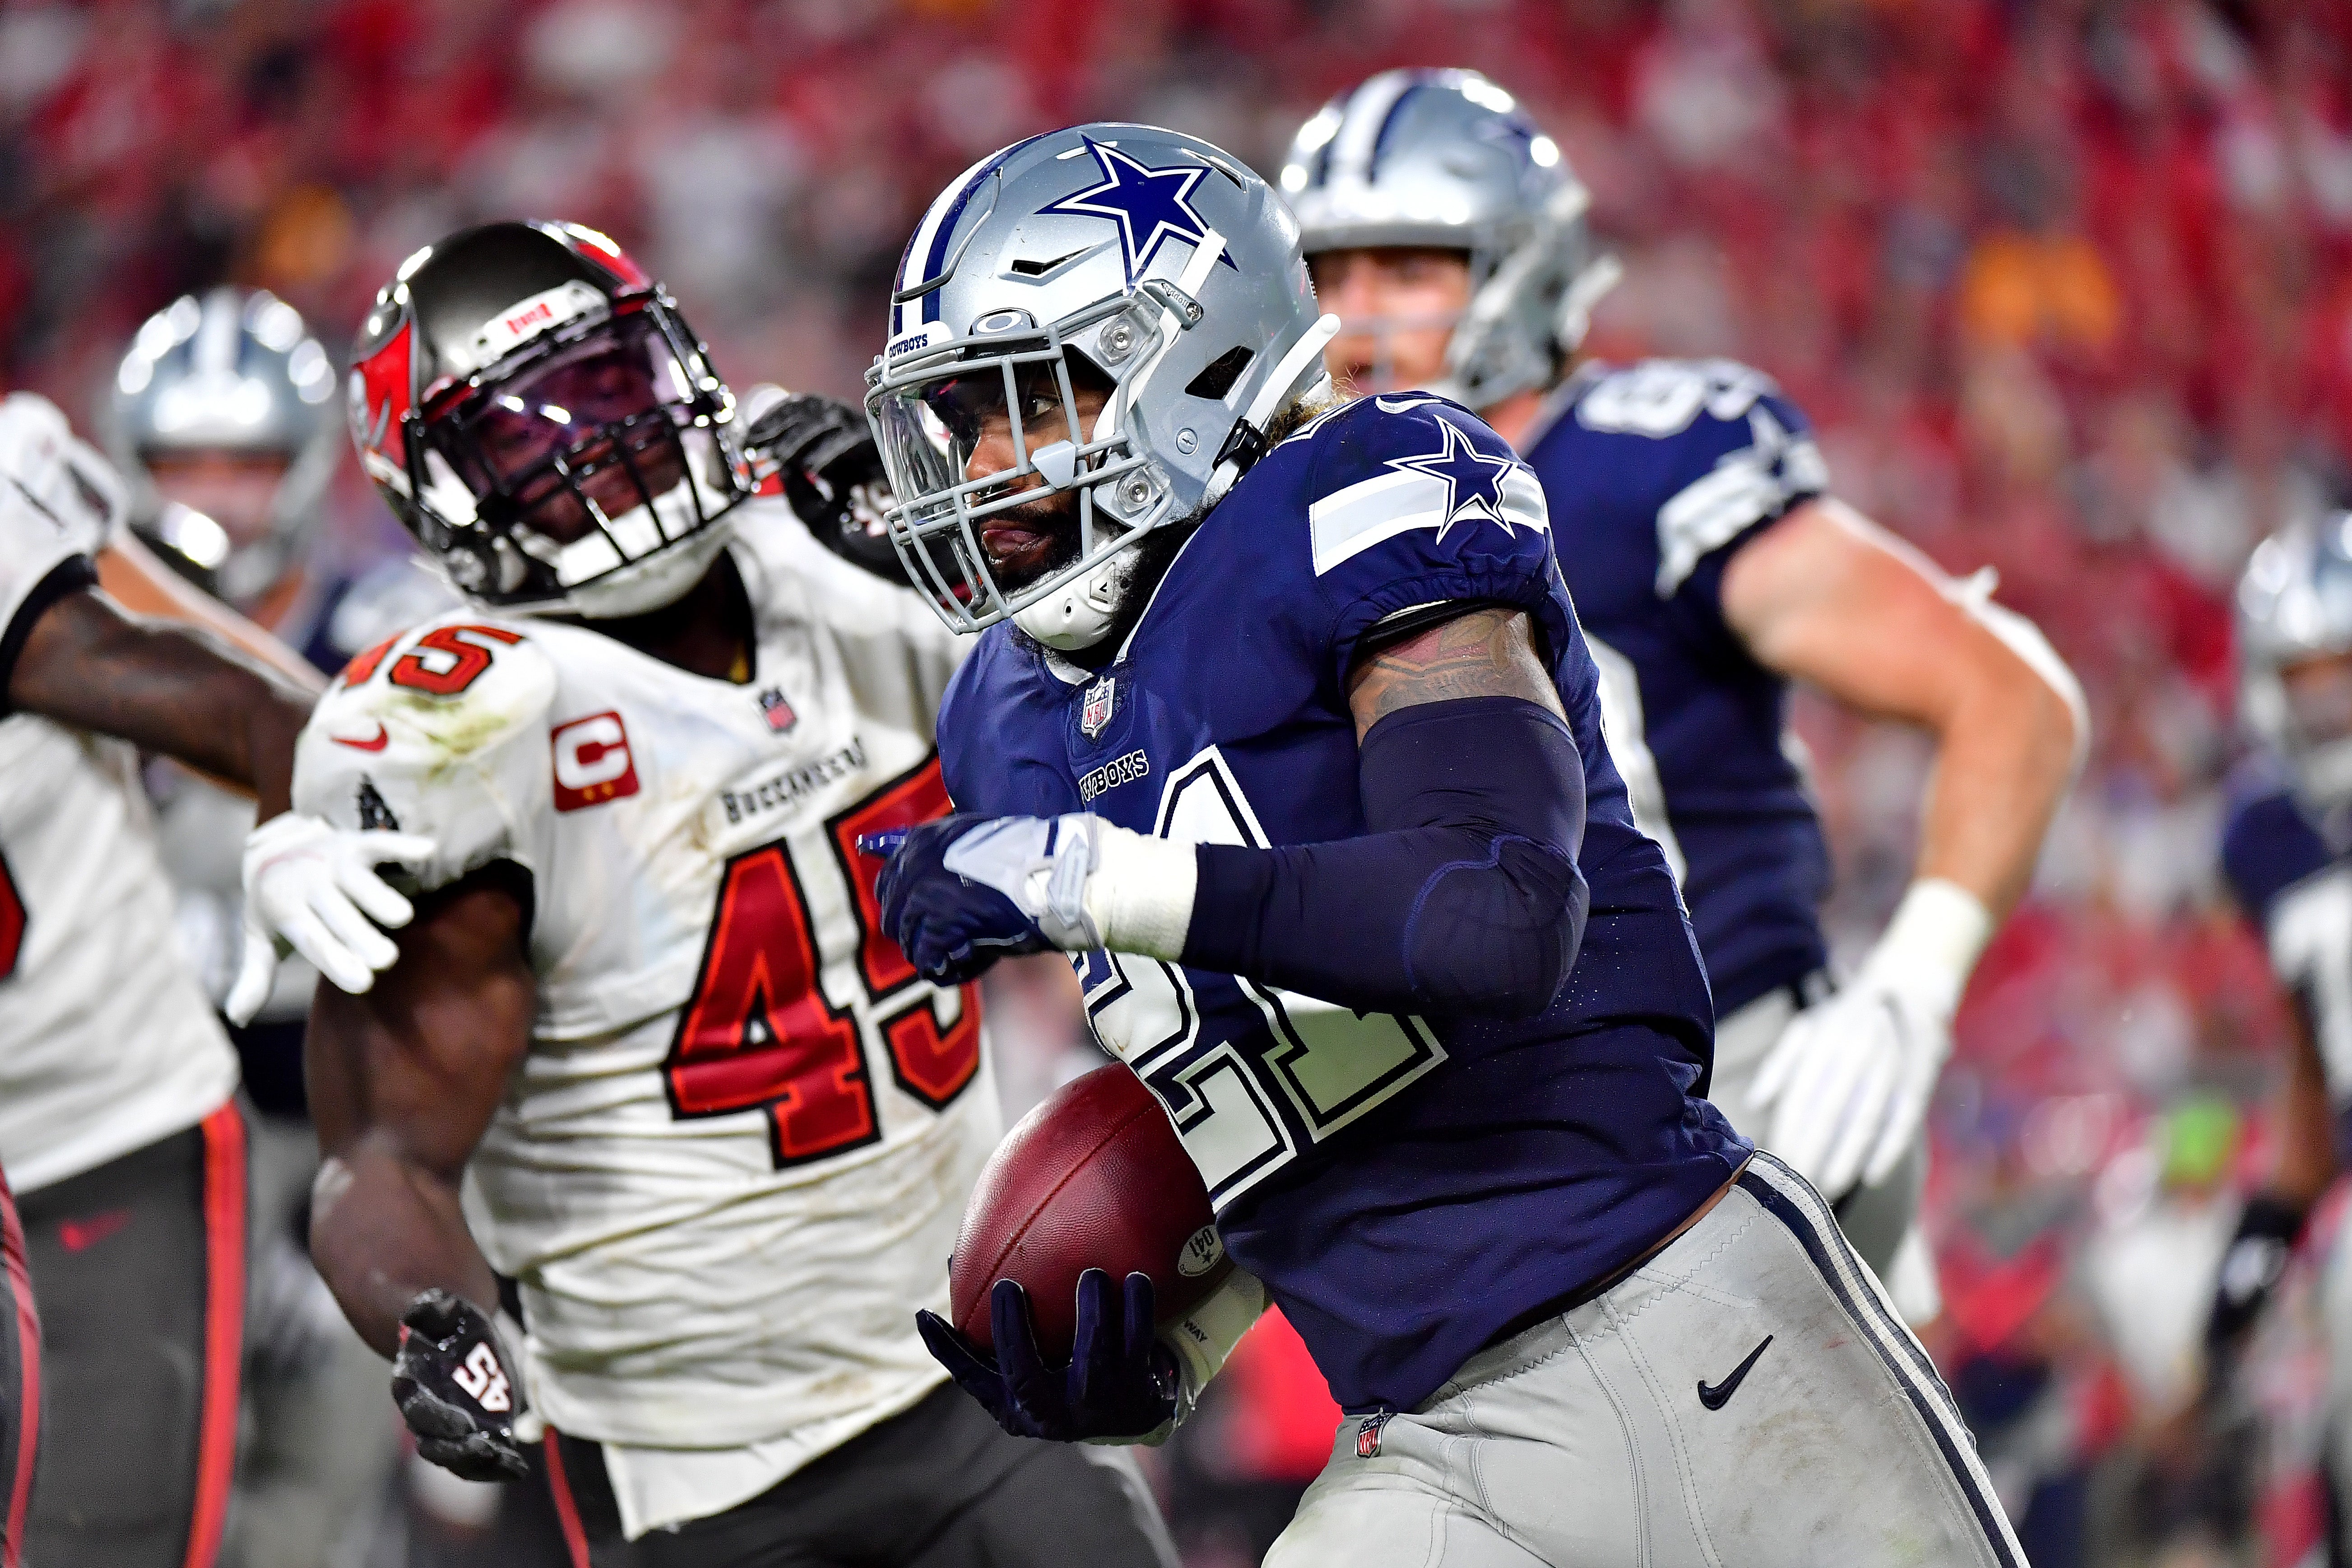 File image: Ezekiel Elliott #21 of the Dallas Cowboys carries the ball against the Tampa Bay Buccaneers